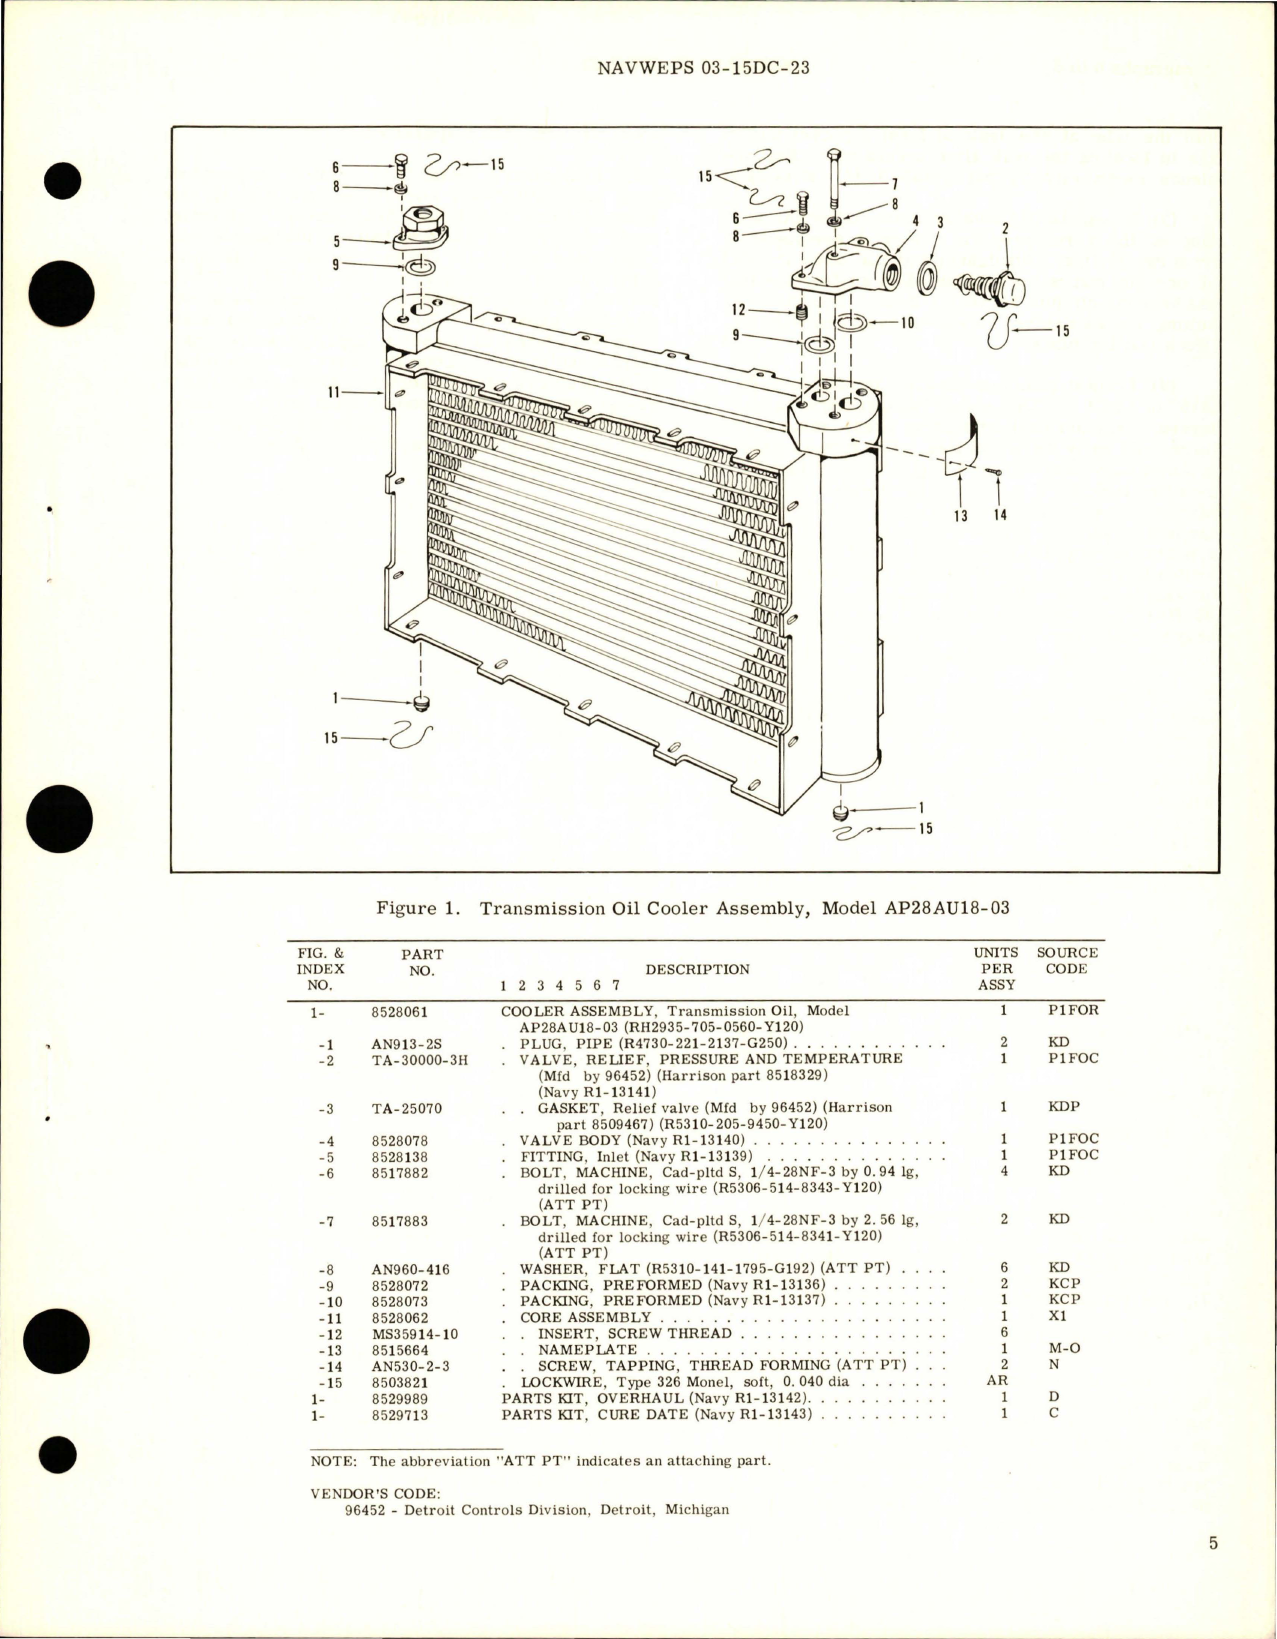 Sample page 5 from AirCorps Library document: Overhaul Instructions with Parts for Transmission Oil Cooler Assembly - Model AP28AU18-03 - Part 8528061